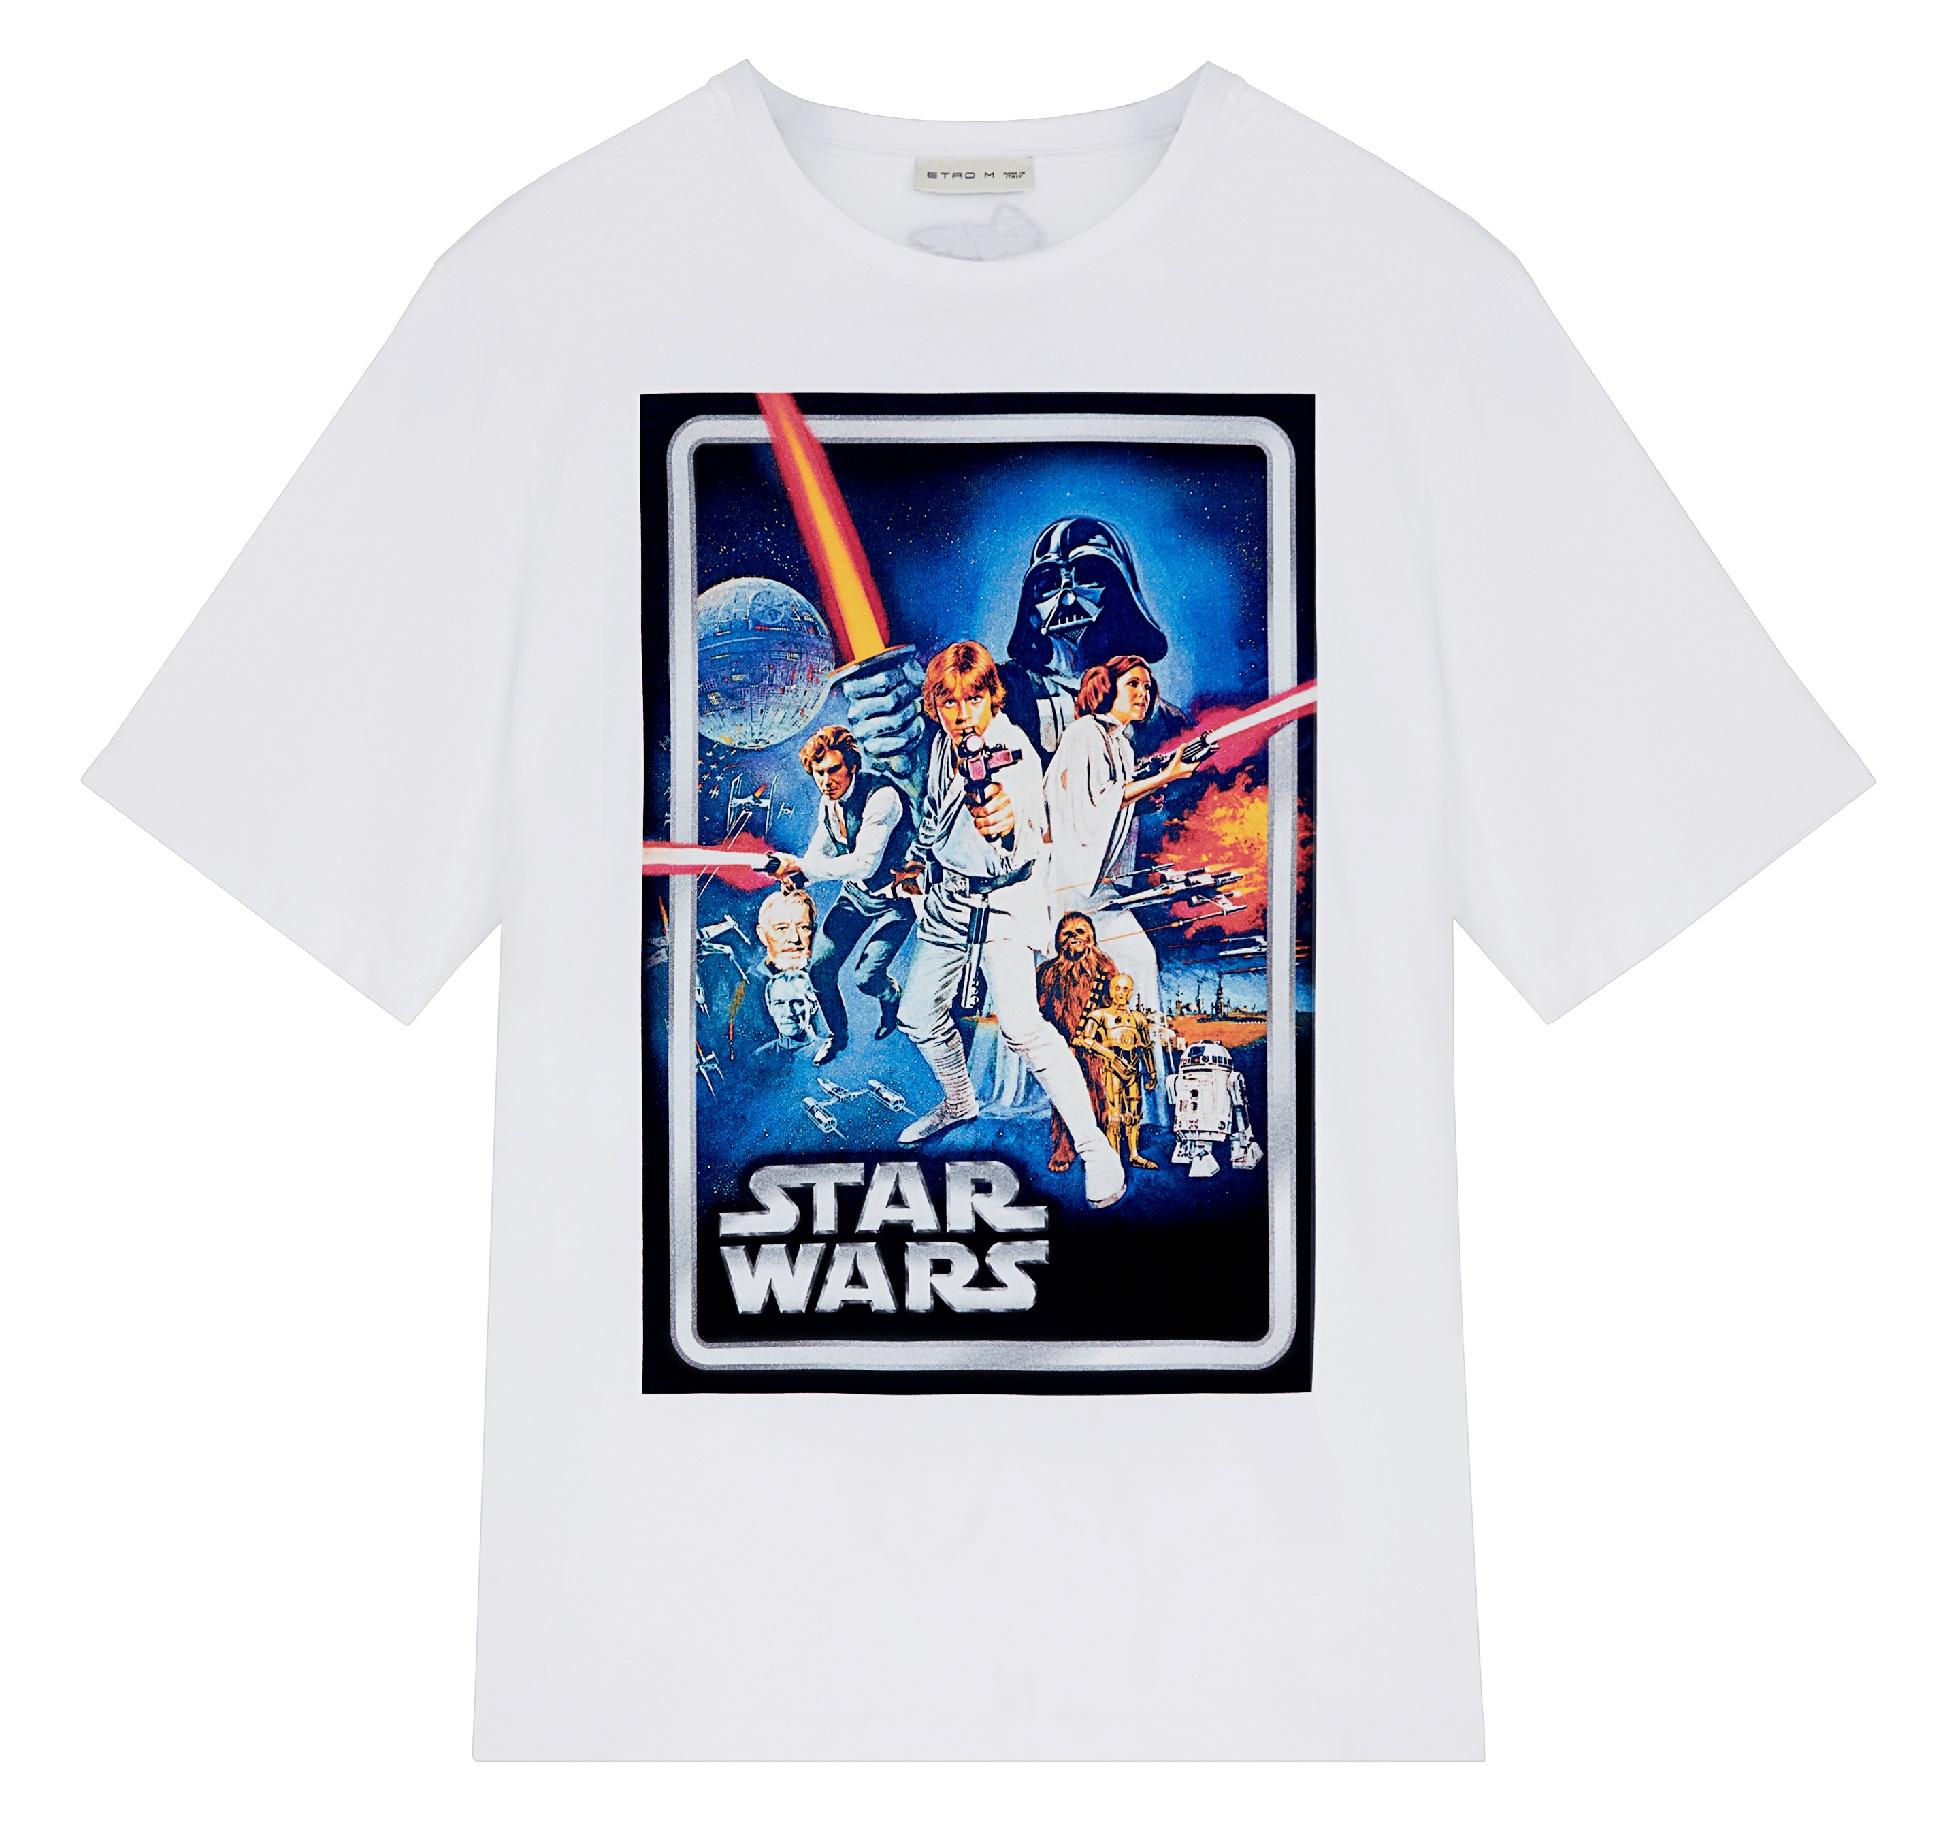 ETRO X STAR WARS white t-shirt featuring a vintage print from the film series.